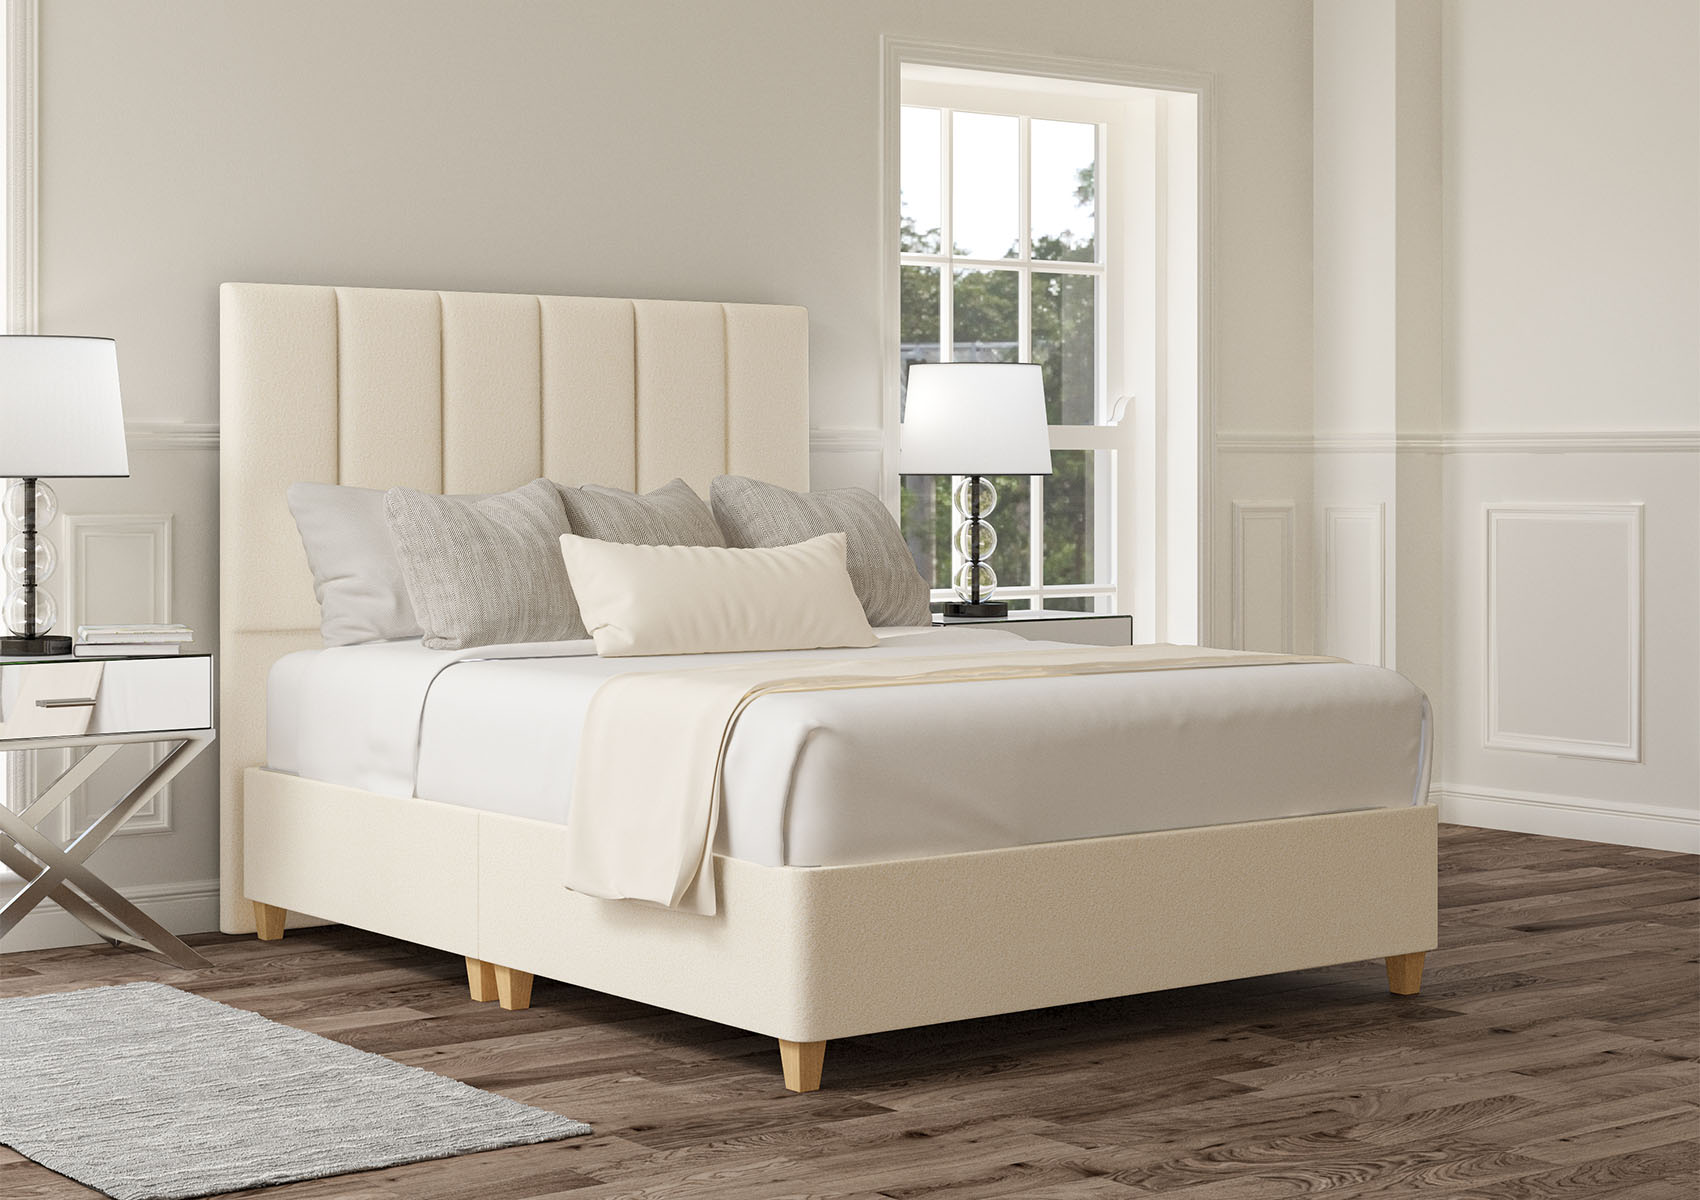 View Empire Teddy Cream Upholstered King Size Divan Bed Time4Sleep information